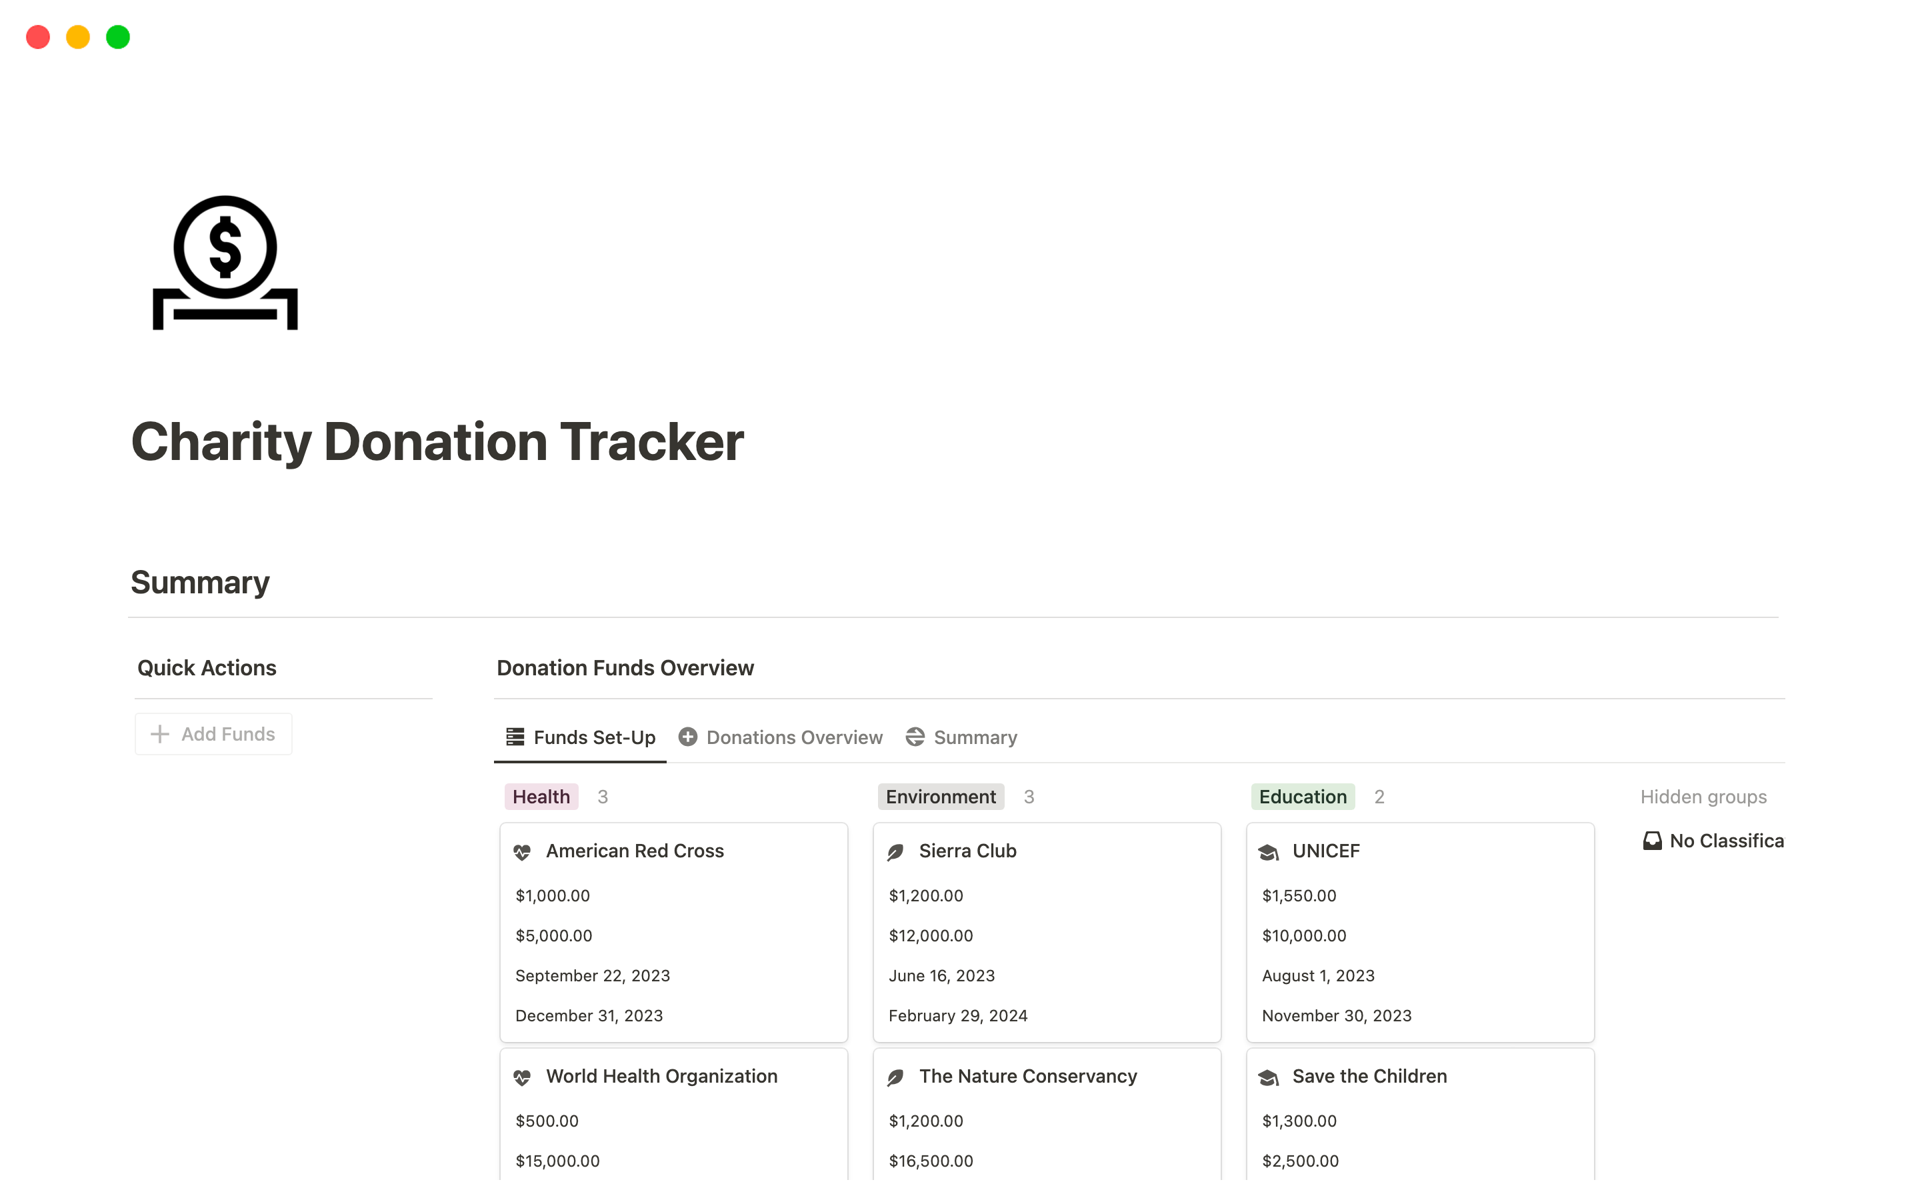 If you make regular donations to charitable organizations, this tracker helps you keep records of your contributions for tax purposes and charitable planning.